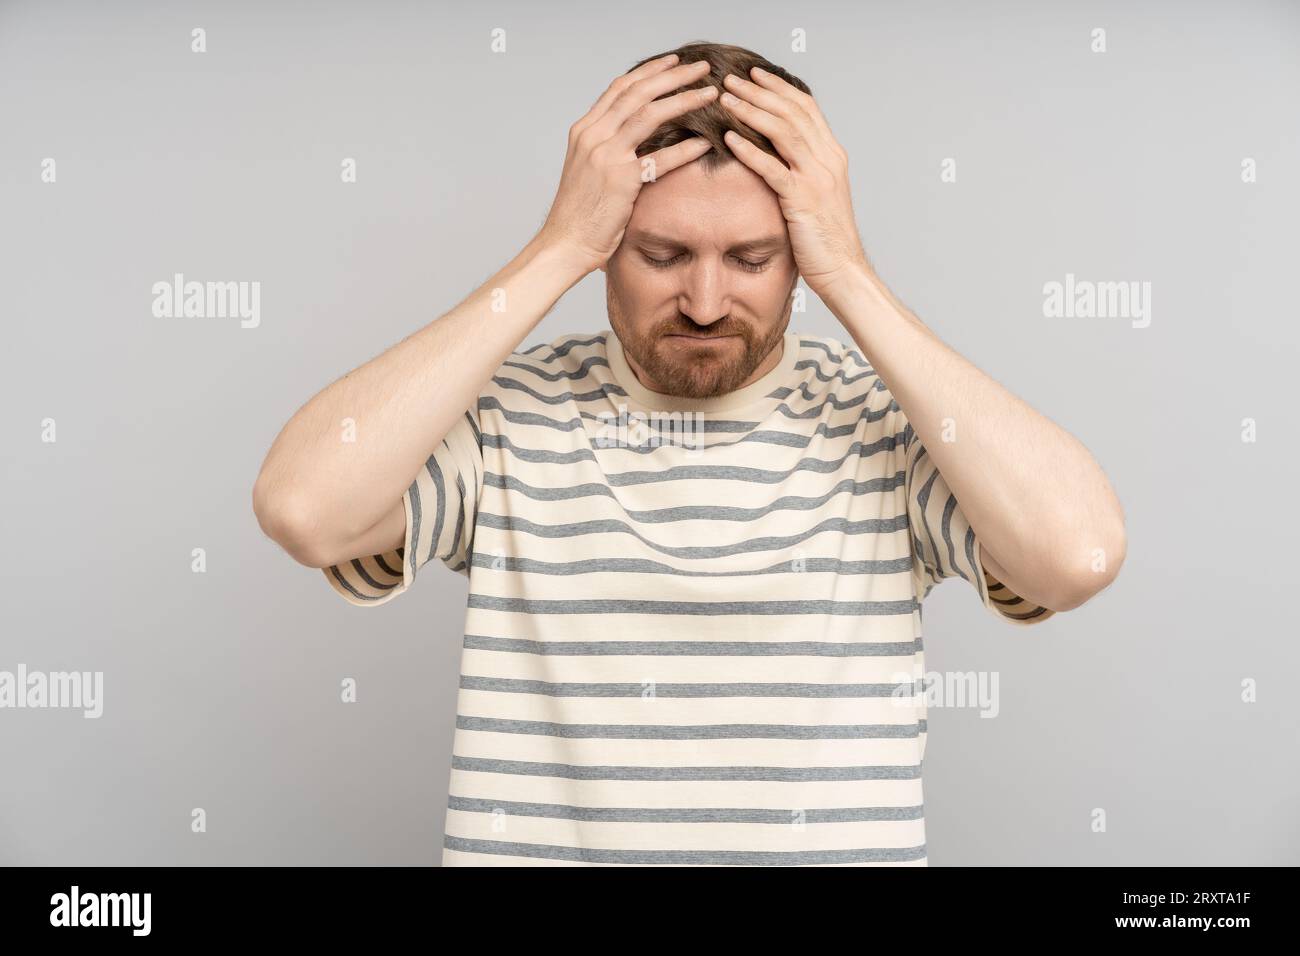 Extremely disappointed man holds head. Suffering discouragement mental breakdown stress headache Stock Photo